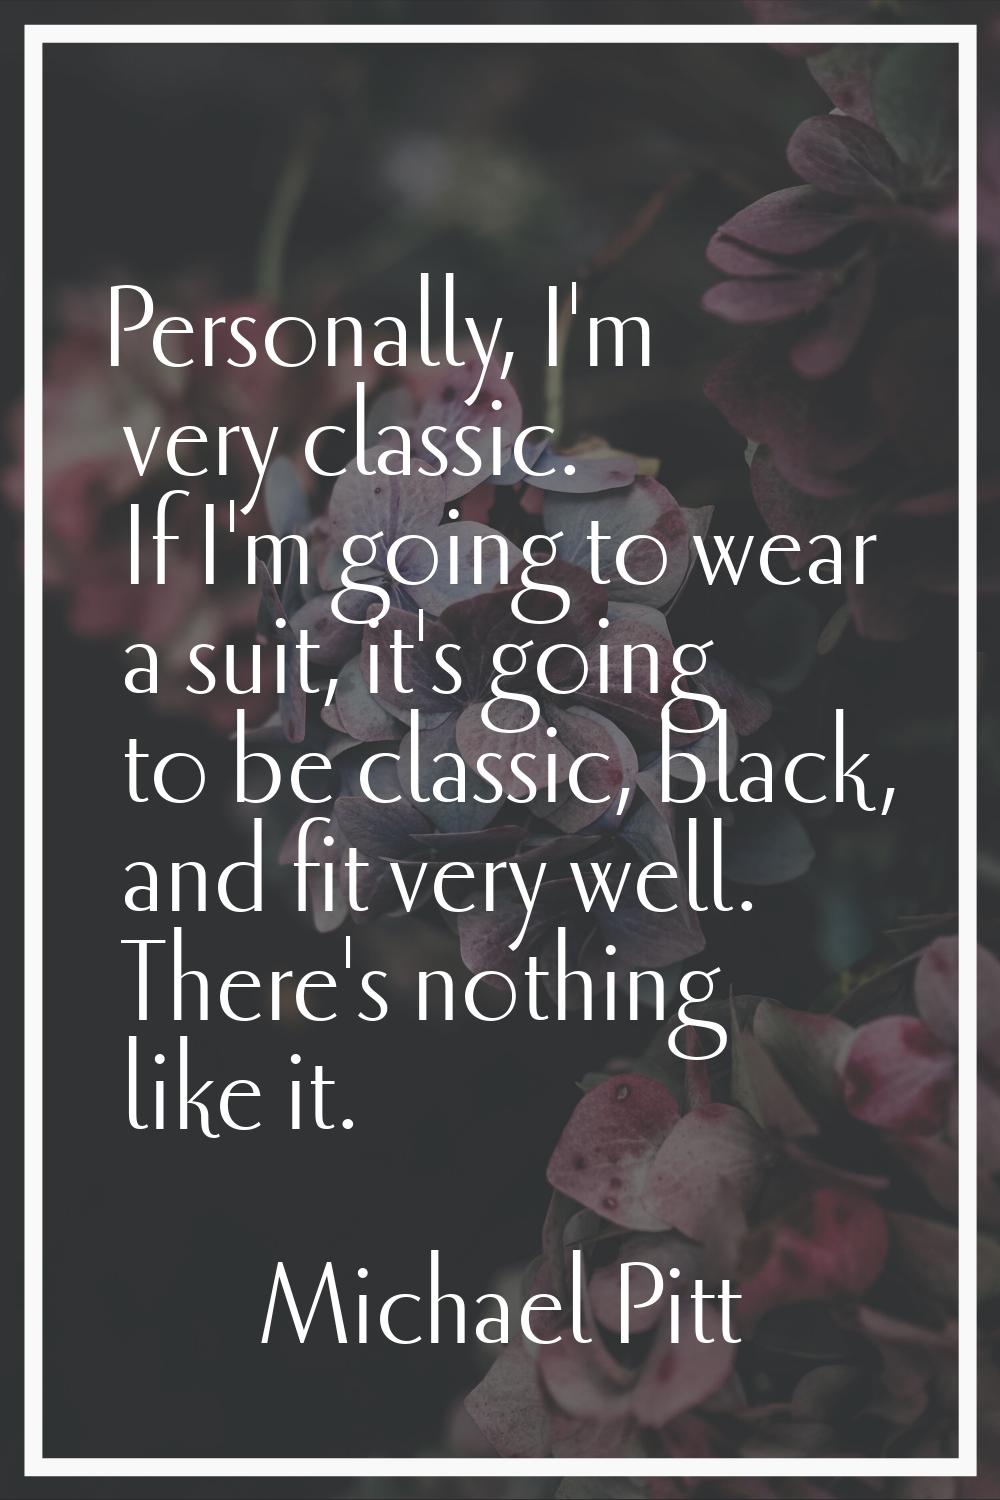 Personally, I'm very classic. If I'm going to wear a suit, it's going to be classic, black, and fit